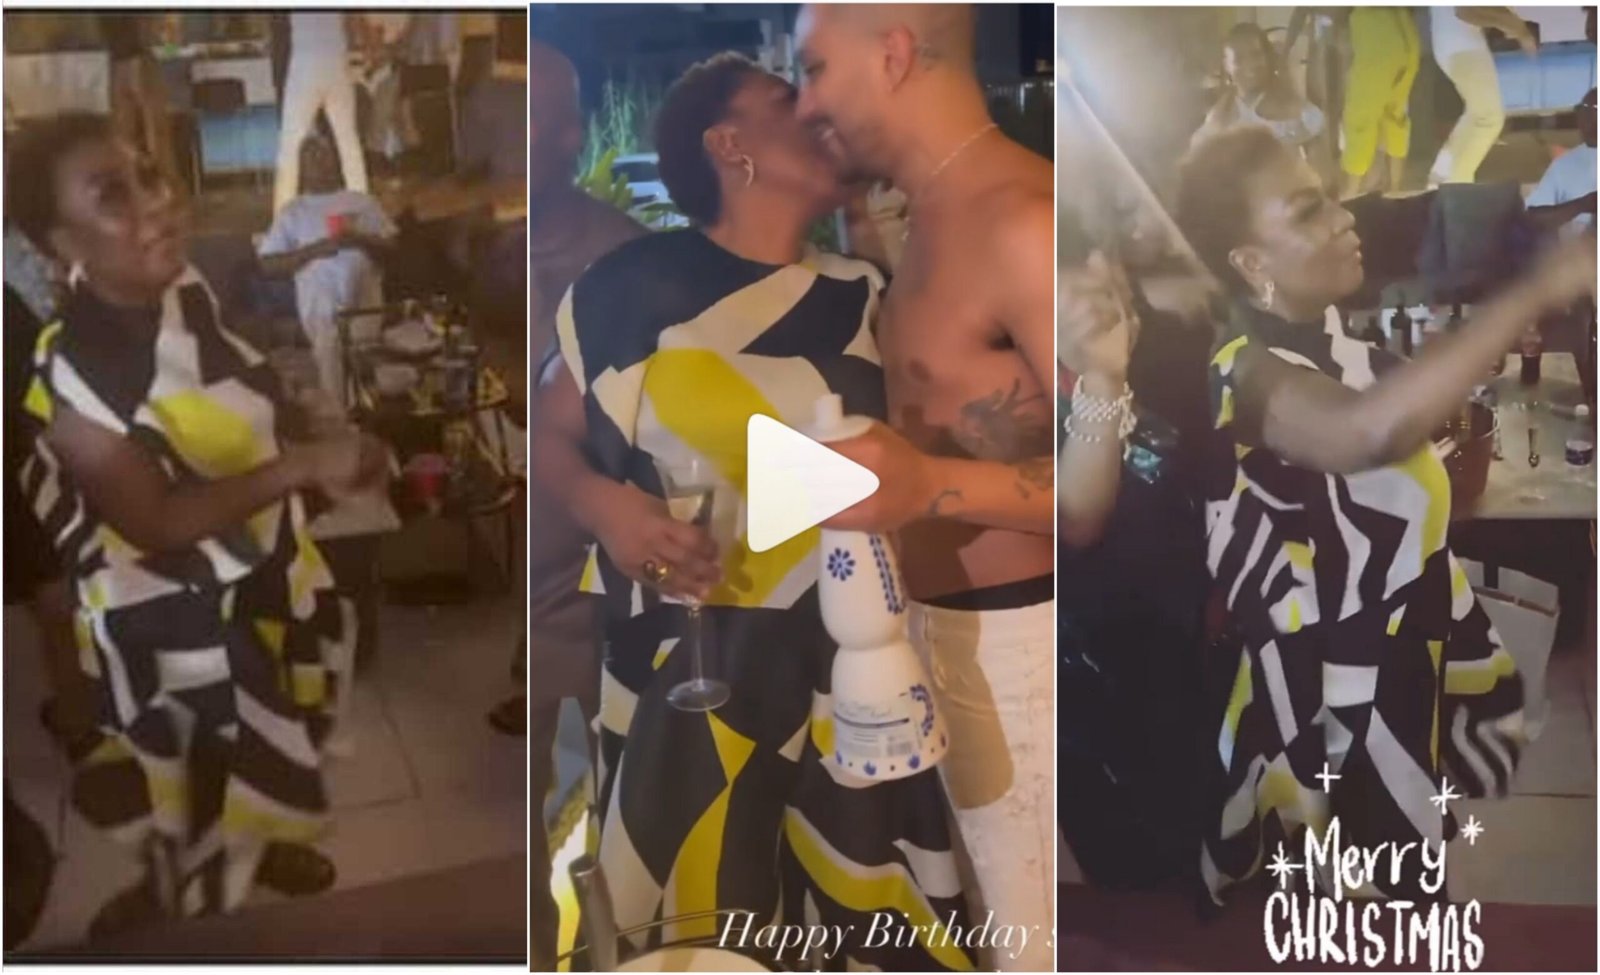 Awesome Moment Burna Boy’s mum steals show, Rocks to son’s music at christmas party (Video)